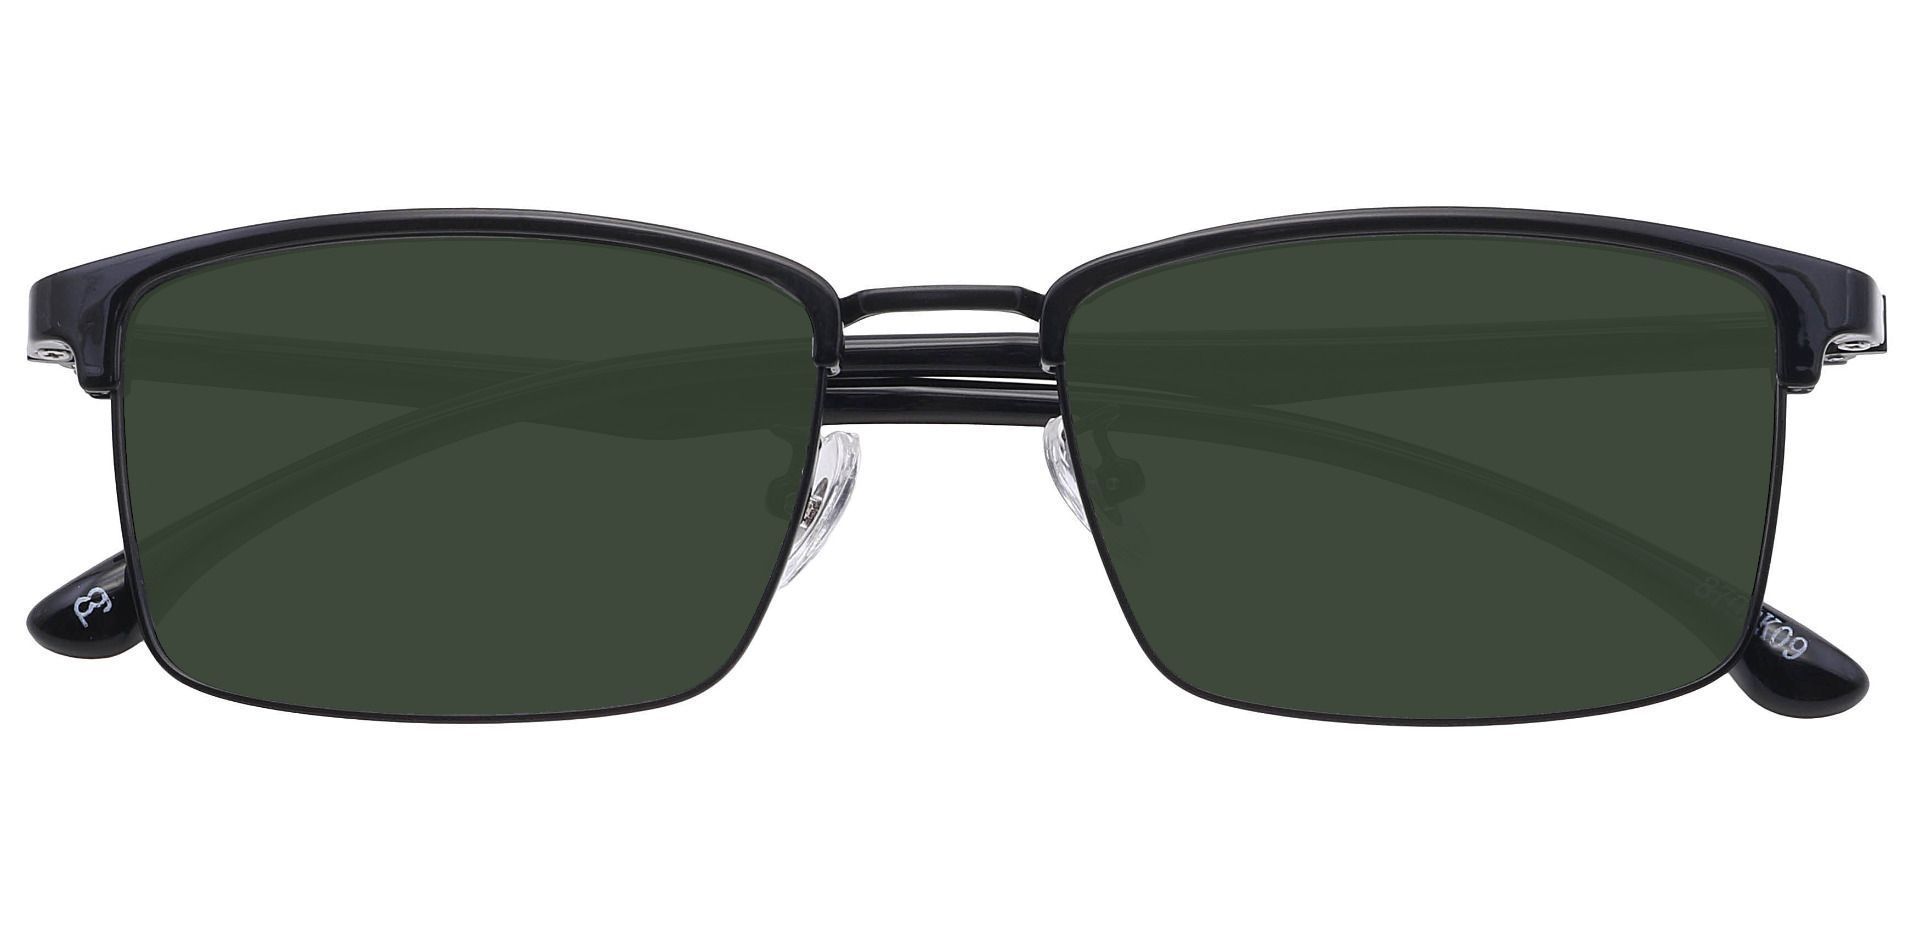 Young Browline Lined Bifocal Sunglasses - Black Frame With Green Lenses